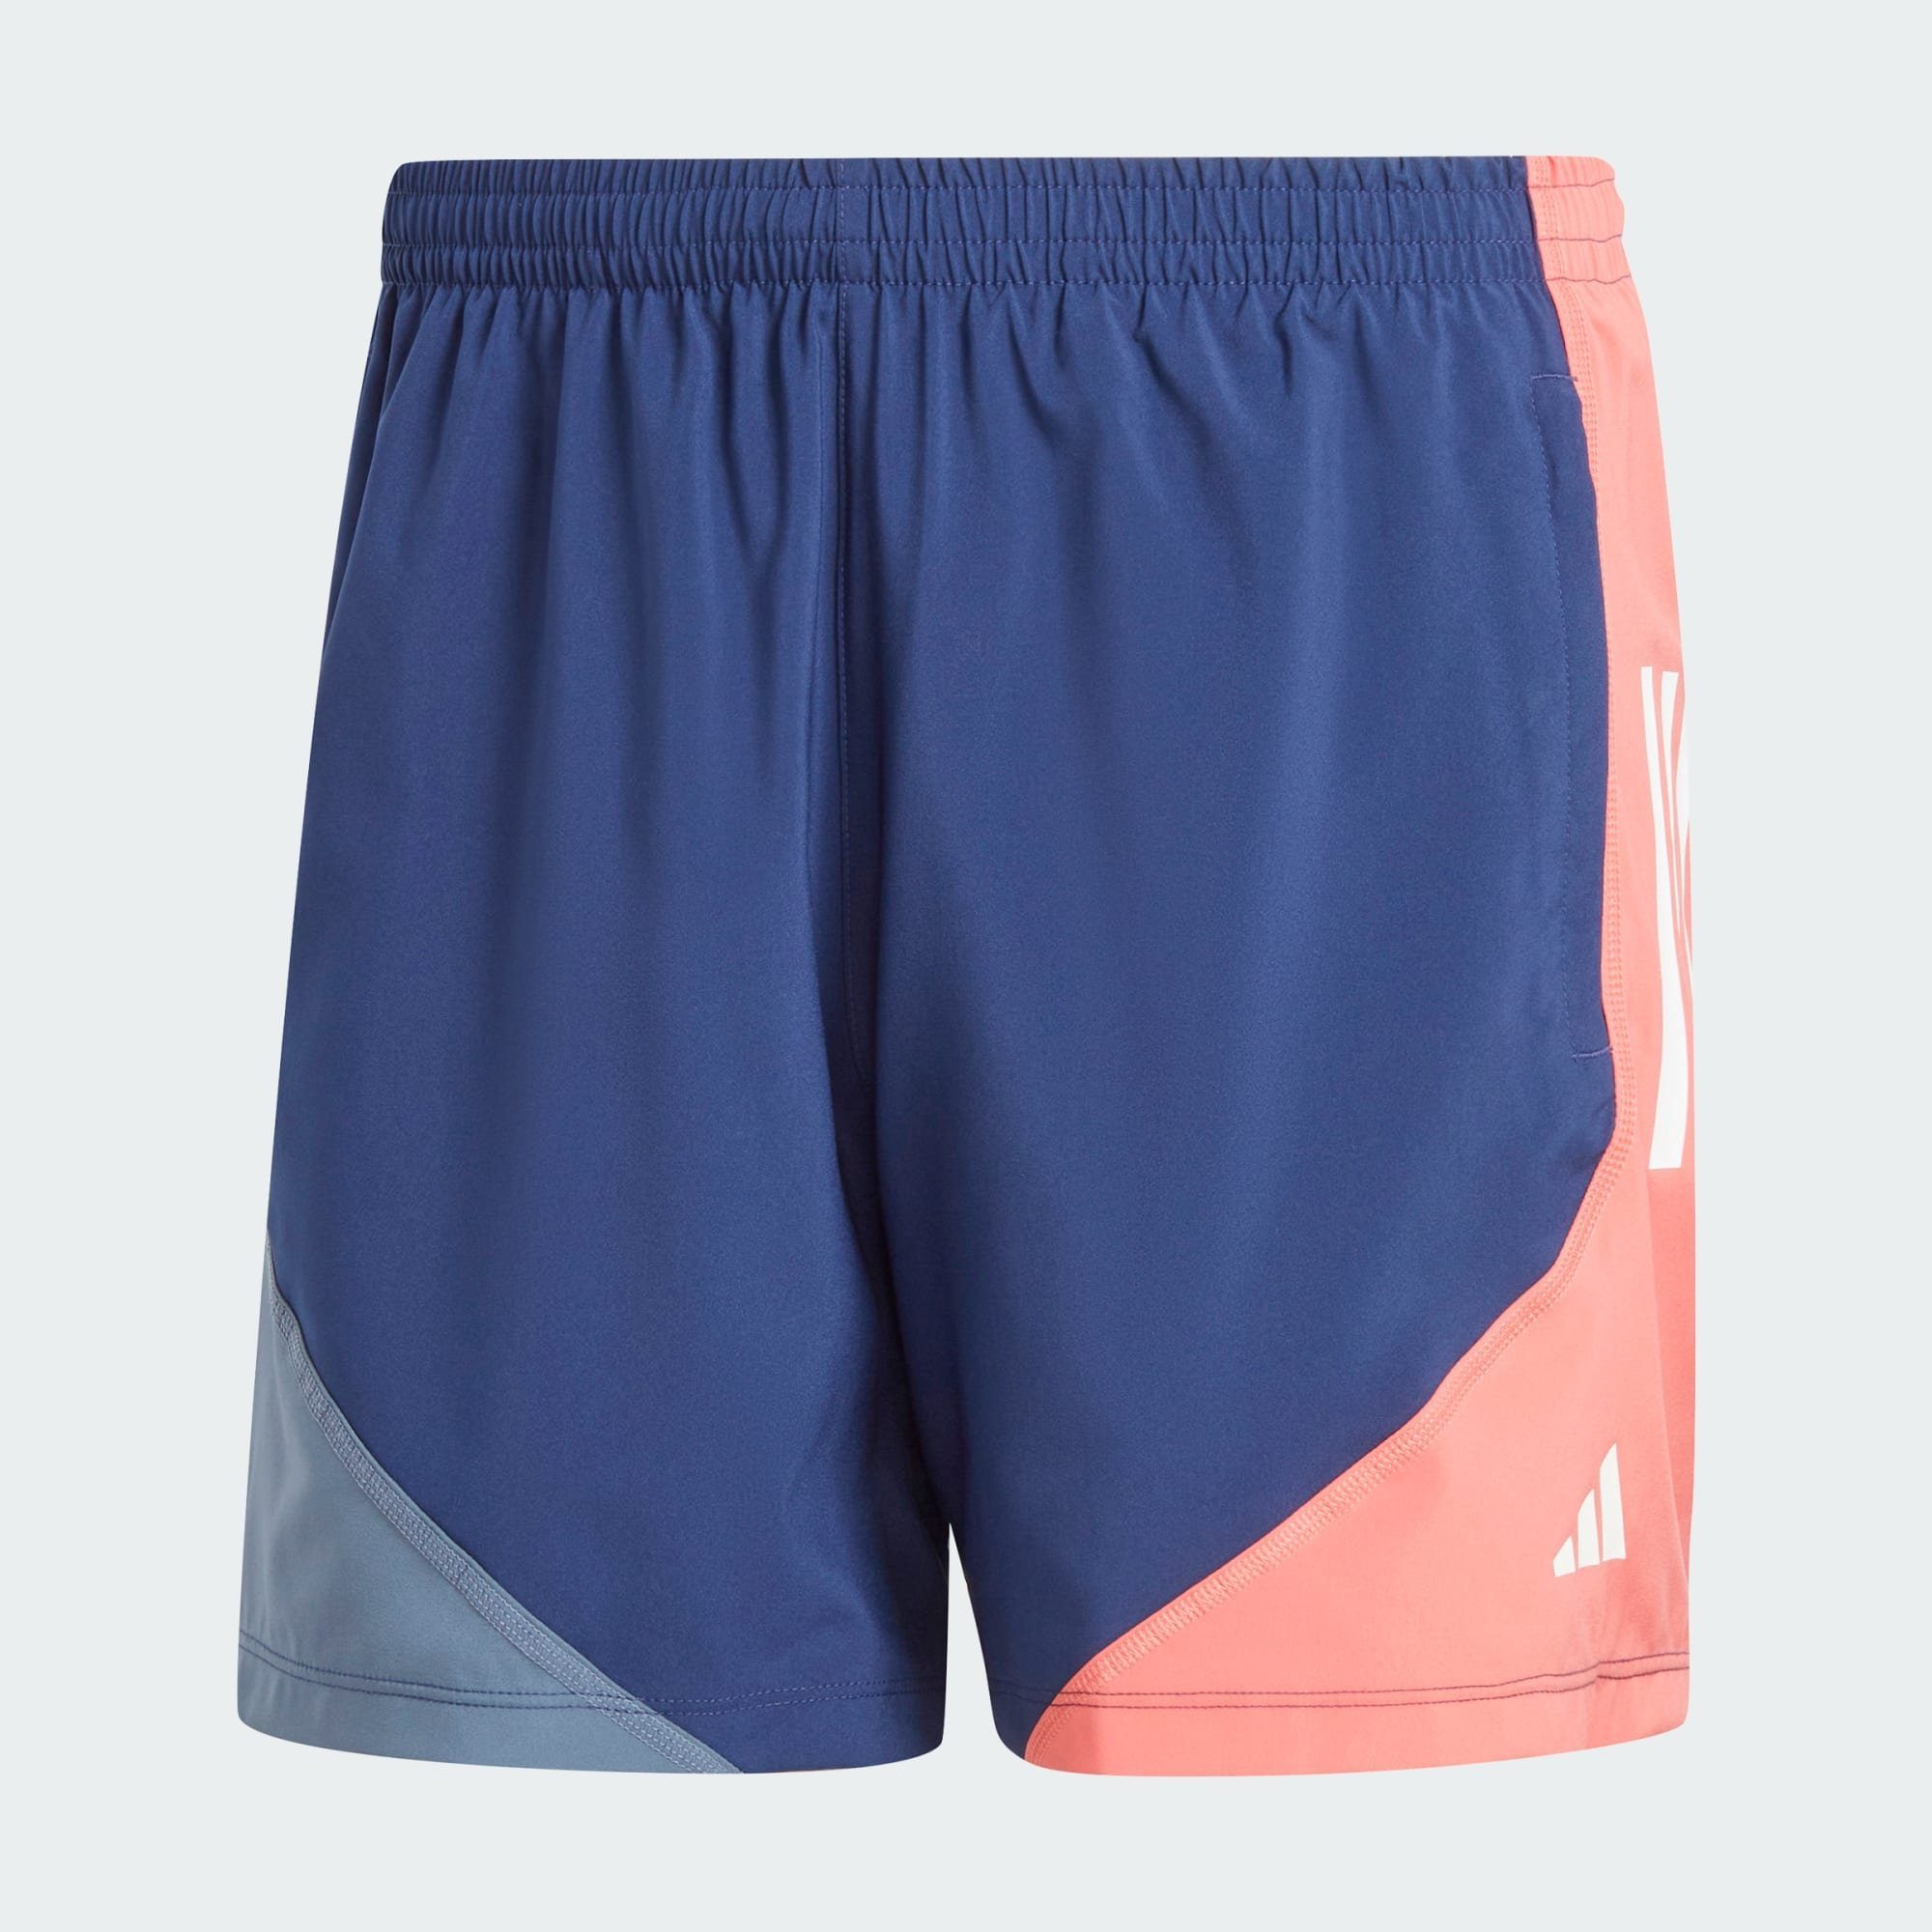 / Blue Dark Ink THE Scarlet Performance adidas RUN SHORTS Preloved / OWN Laufshorts COLORBLOCK Preloved